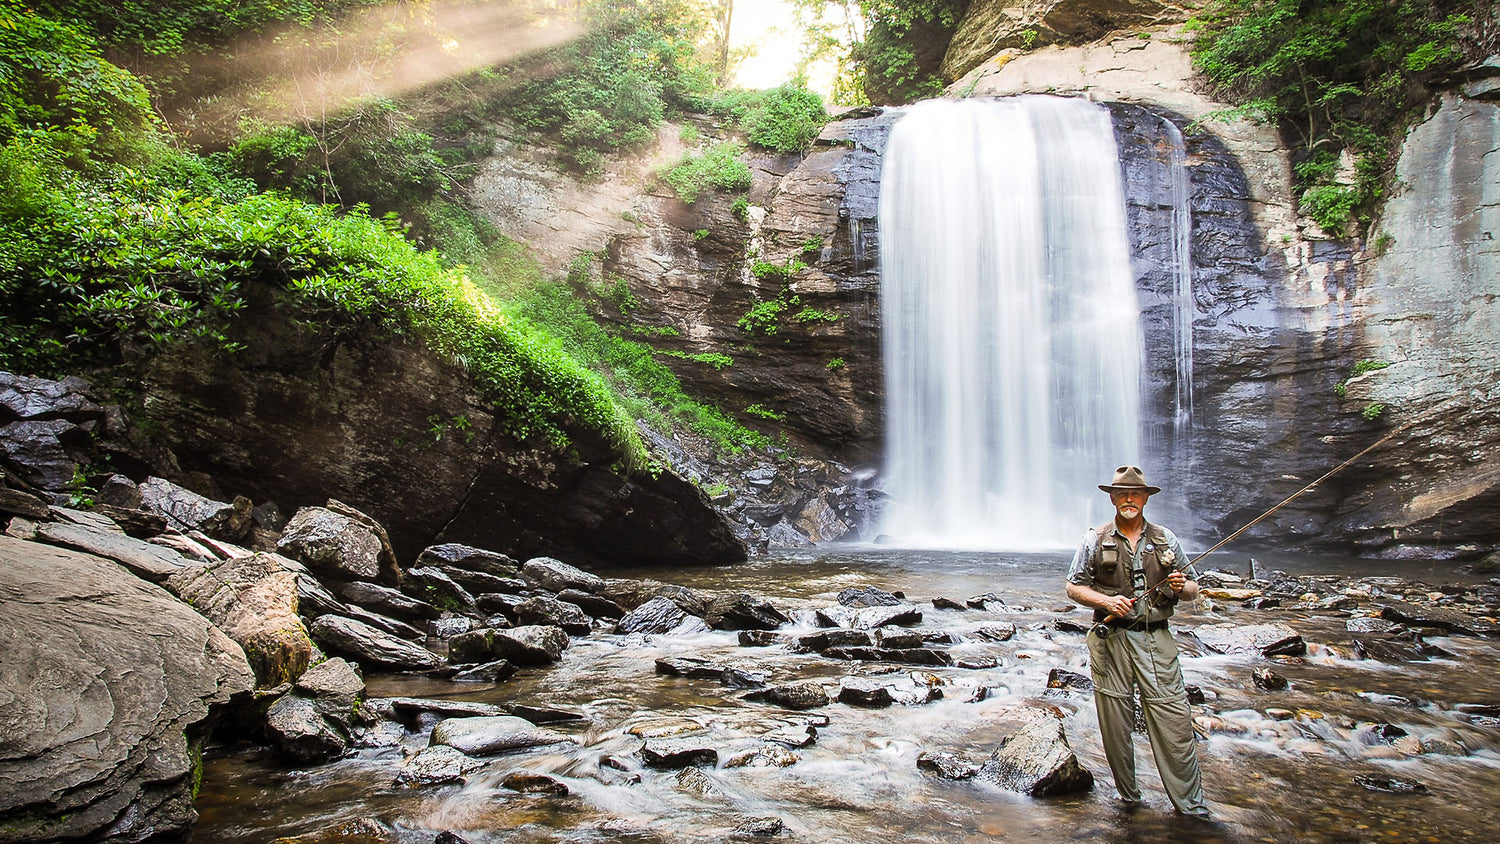 Sam Johnson from Wild Bearings standing ankle deep in rocky moving water with a large waterfall behind him. He is holding a fishing reel and wearing fishing gear